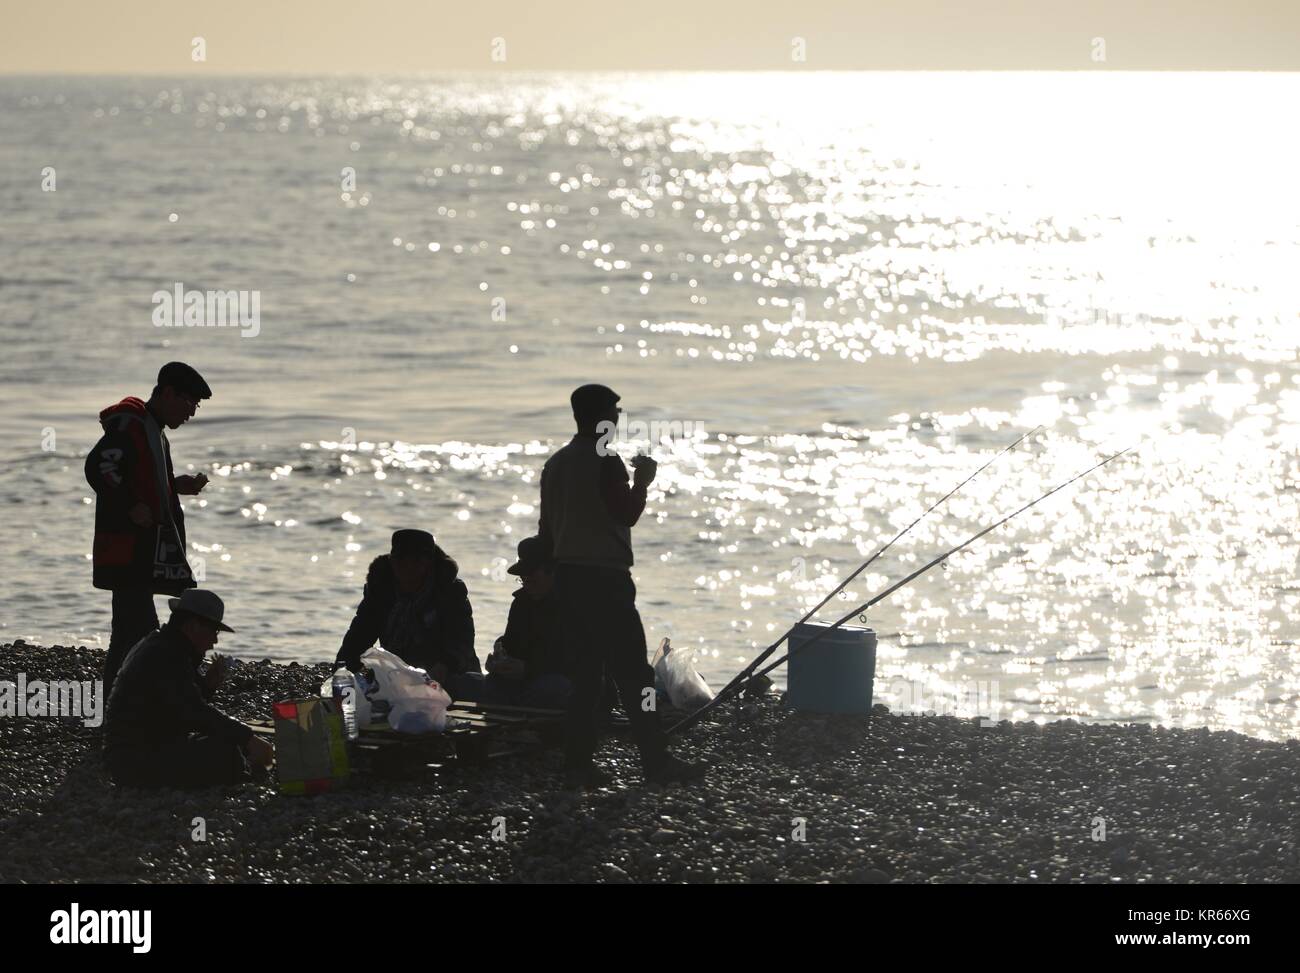 Seaford, East Sussex, UK. 19th Dec, 2017. People enjoying bright winter sunshine on Seaford beach, Eas Sussex. Credit: Peter Cripps/Alamy Live News Stock Photo